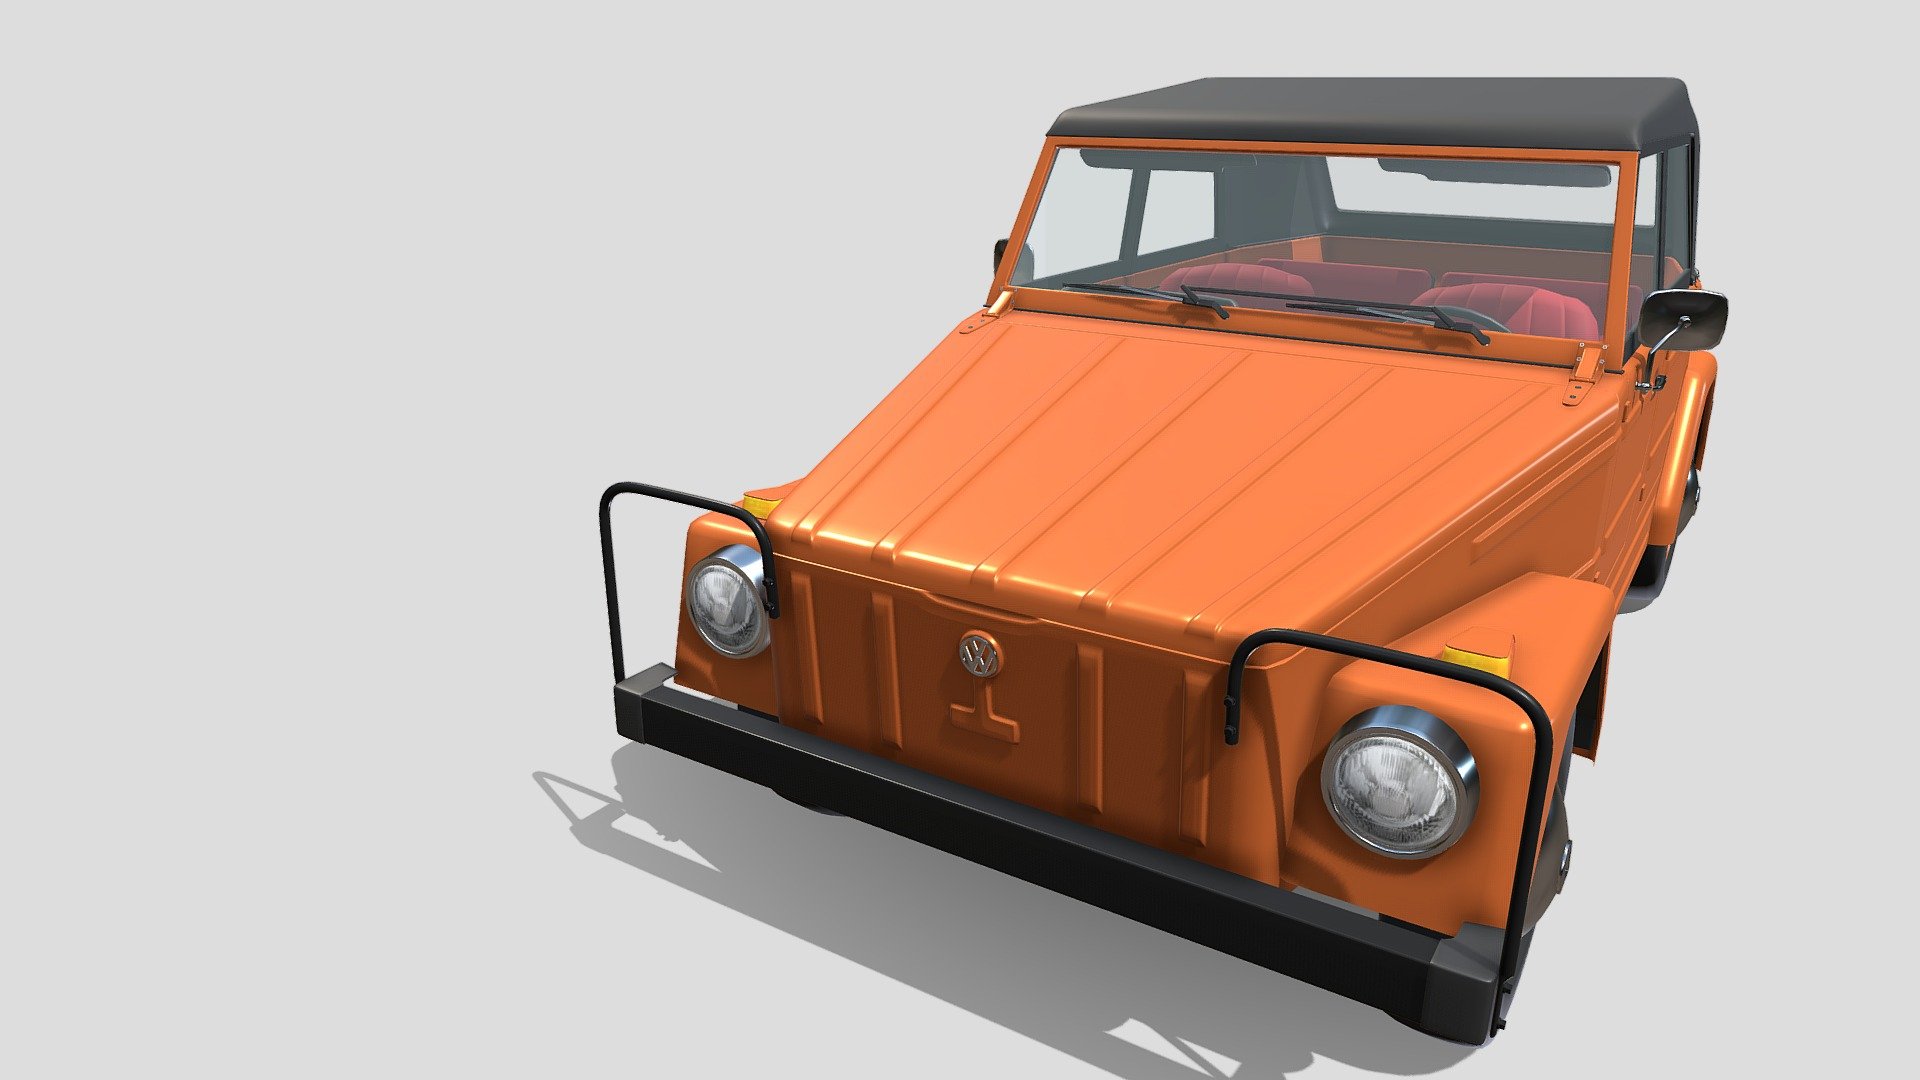 A very accurate model of a Volkswagen 181 Thing with interior. The model comes in 3 formats:
-.blend, rendered with cycles, as seen in the images, animated;
-.obj, with materials applied;
-.fbx;

This 3d model was originally created in Blender 2.78 and rendered with Cycles.
The model has materials applied in all formats, and are ready to import and render.
For any problems please feel free to contact me.
Don't forget to rate and enjoy! - VW Type 181 w interior top up - Buy Royalty Free 3D model by dragosburian 3d model